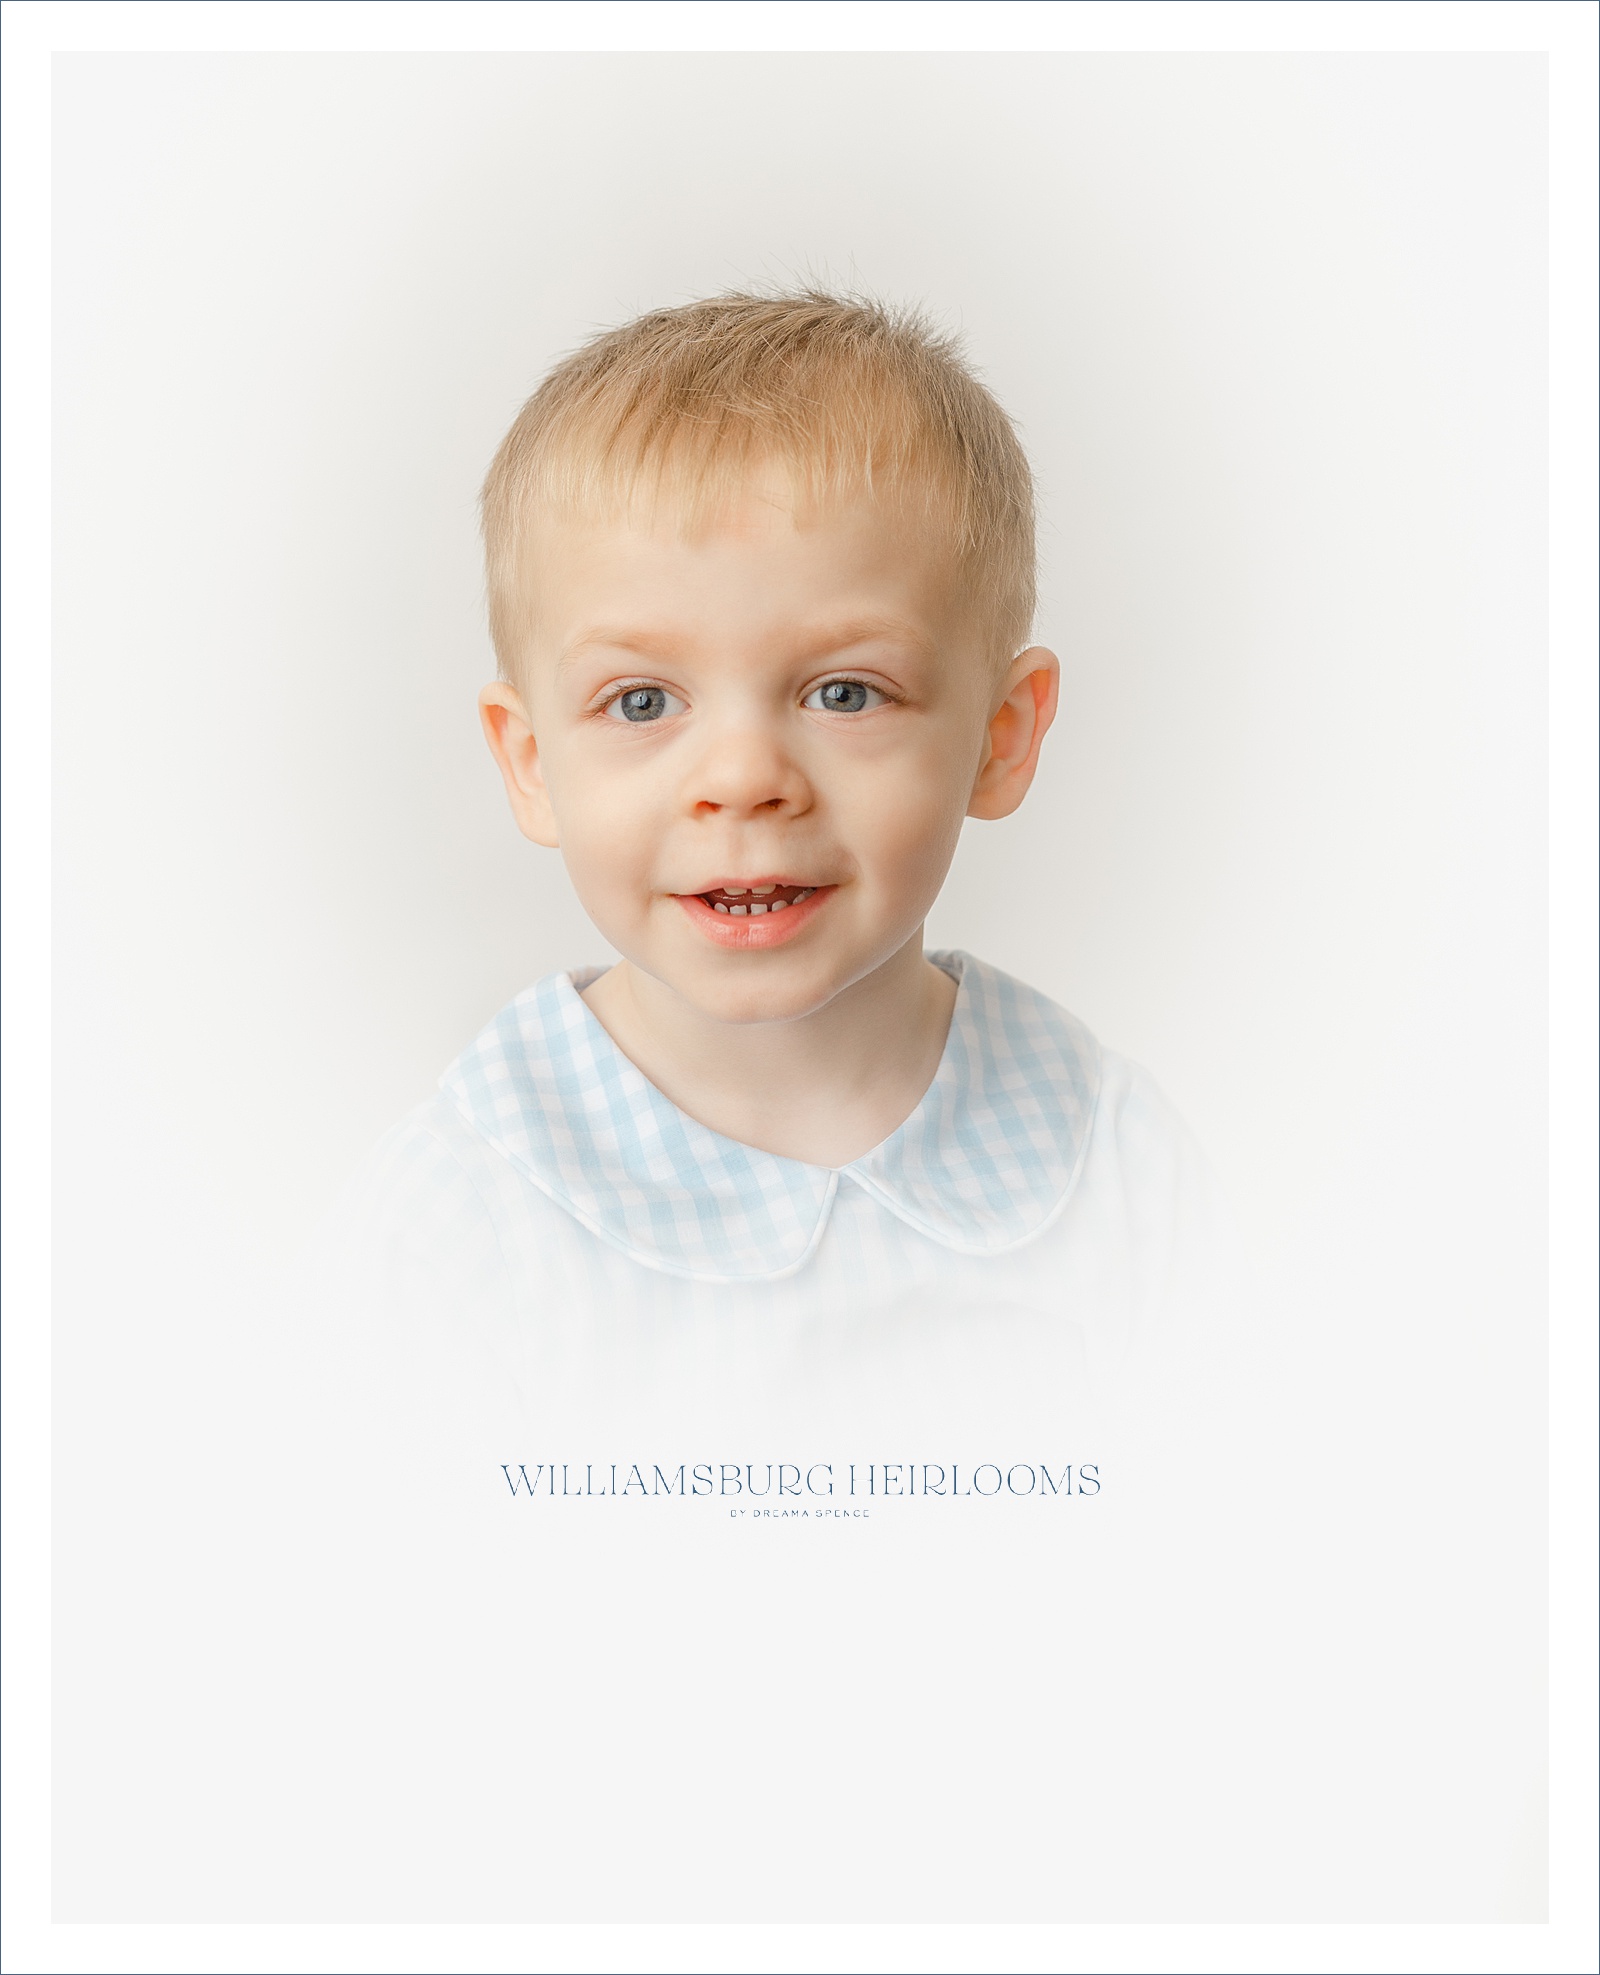 Heirloom vignette portrait of boy in white and blue checkered outfit.